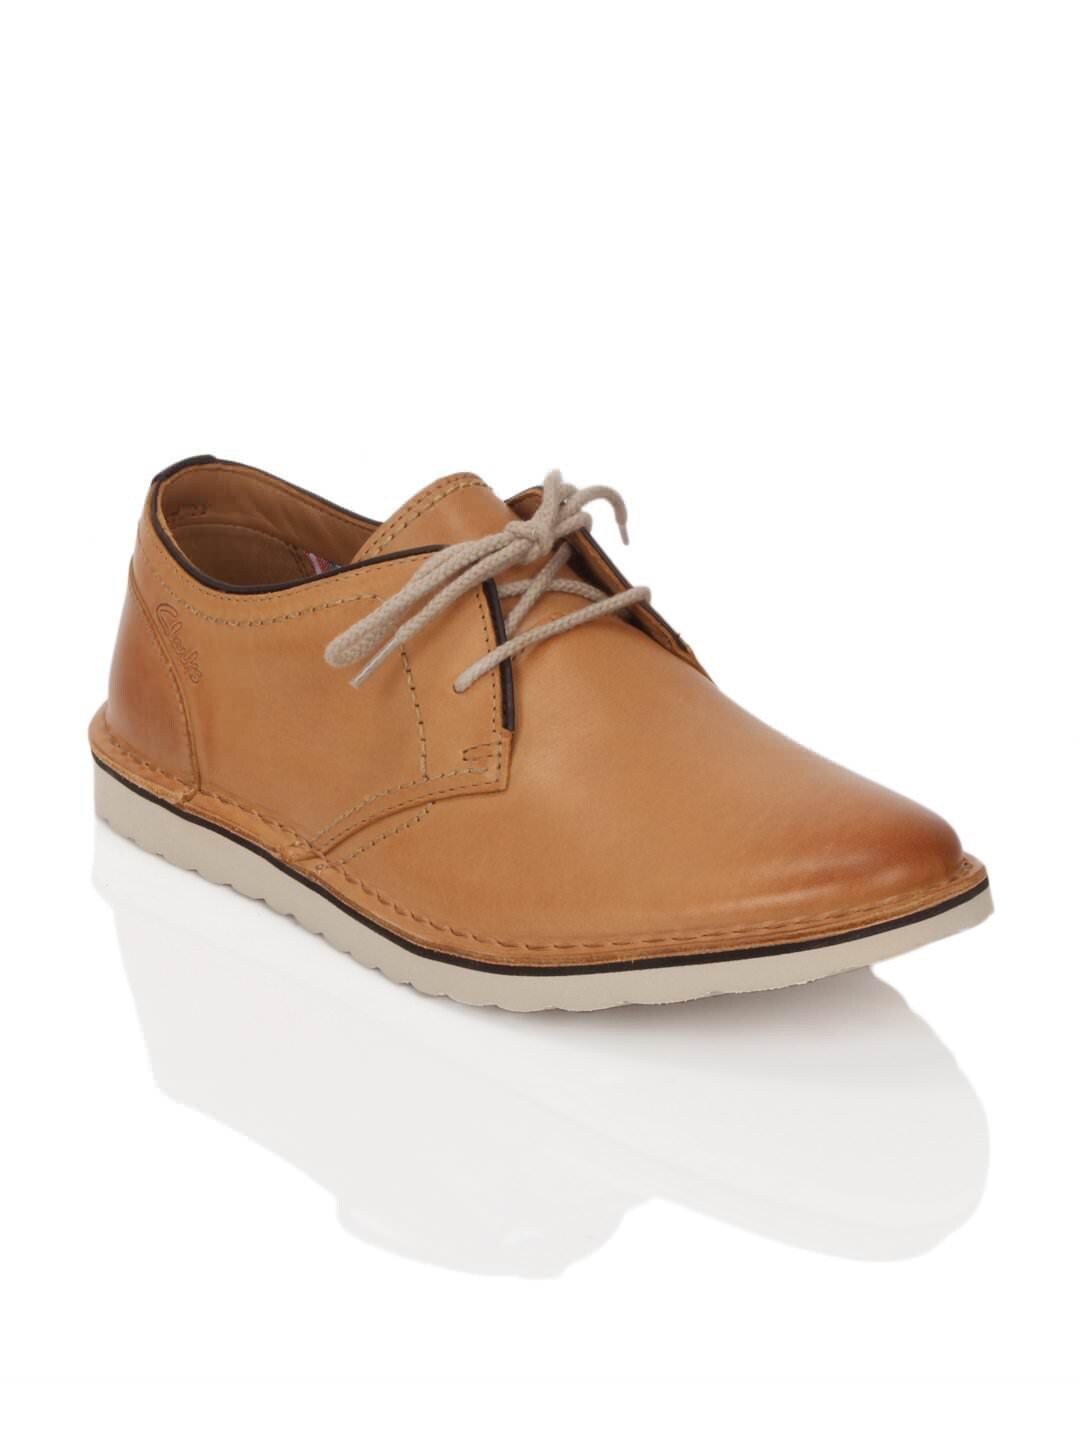 Clarks Men Manor Hall Natural Leather Tan Shoes